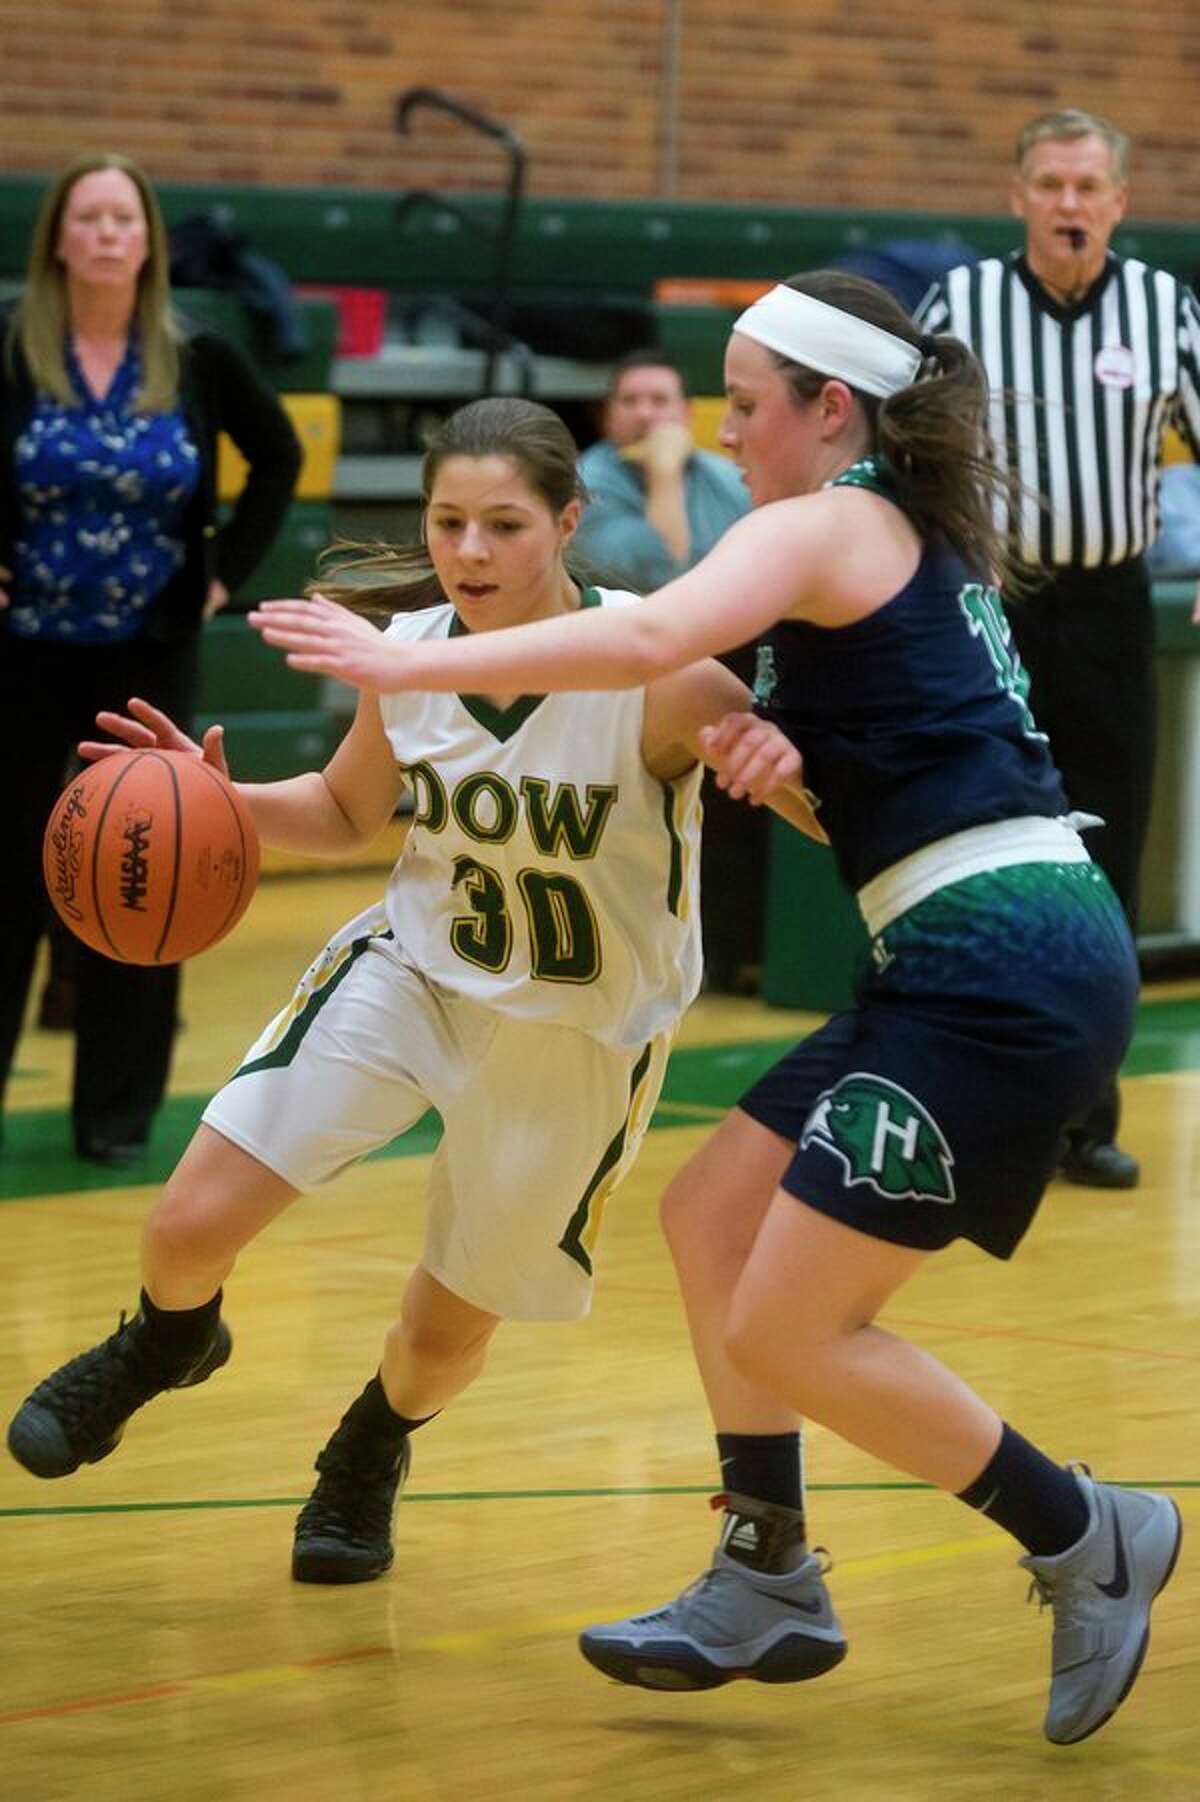 Dow freshman Katelyn Murray dribbles toward the basket during the Chargers' game against Saginaw Heritage on Tuesday at H. H. Dow High School. (Katy Kildee/kkildee@mdn.net)